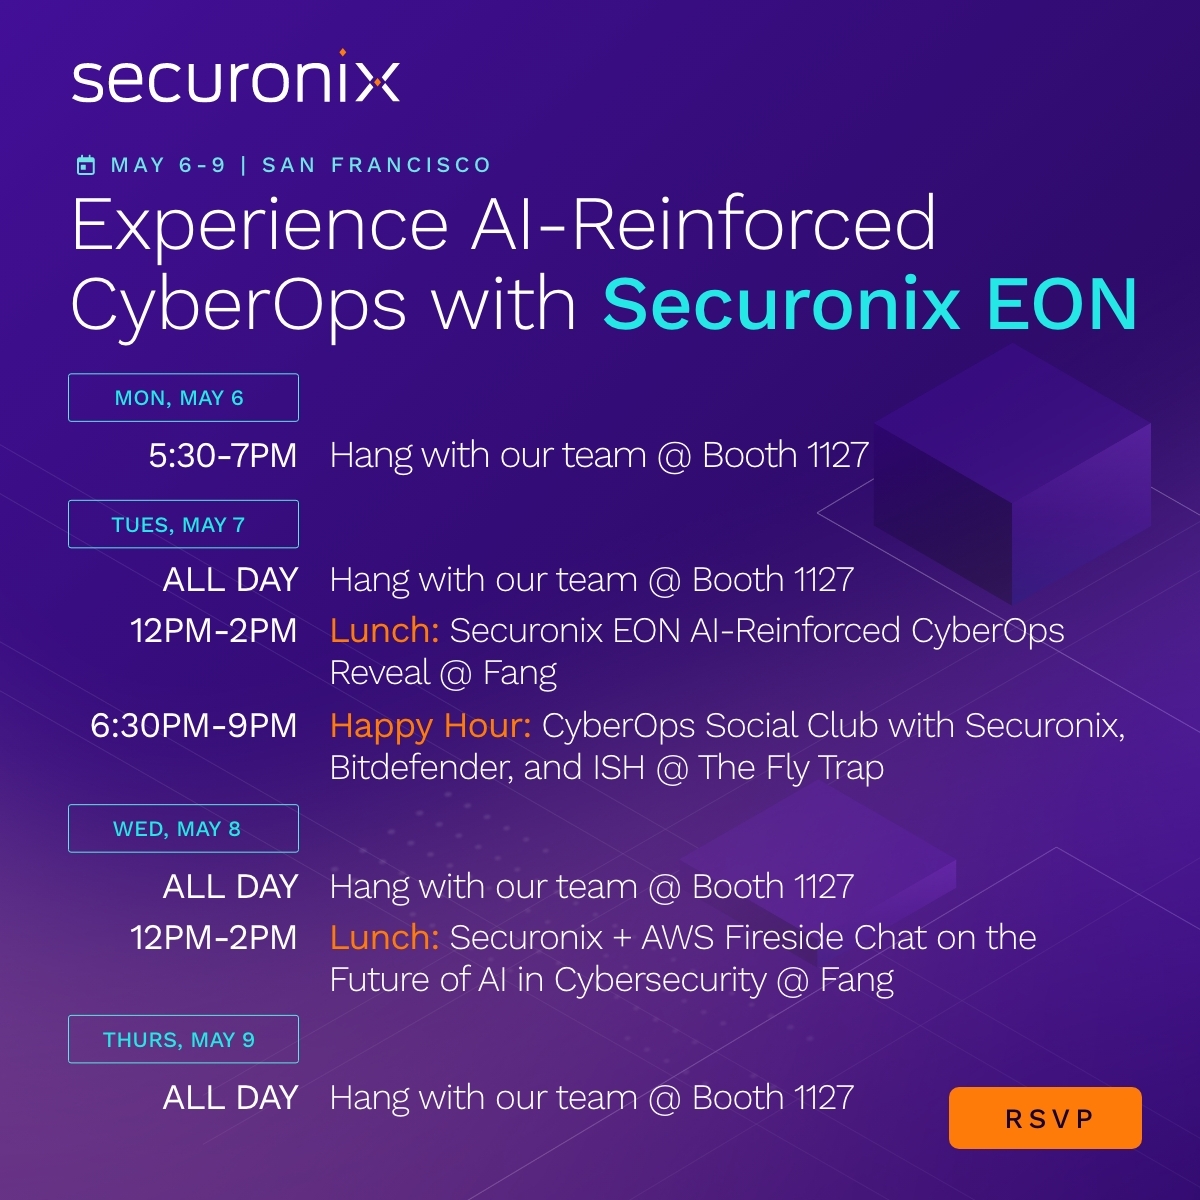 👋 We can't wait to see you May 6-8 at RSA Conference. Check out our full schedule to find out how to join us across an exciting 4 days of AI-Reinforced CyberOps! 🔎 Stop by booth #1127 for live demos and join us at our events. RSVP TODAY! sc.securonix.com/u/FOM8nf